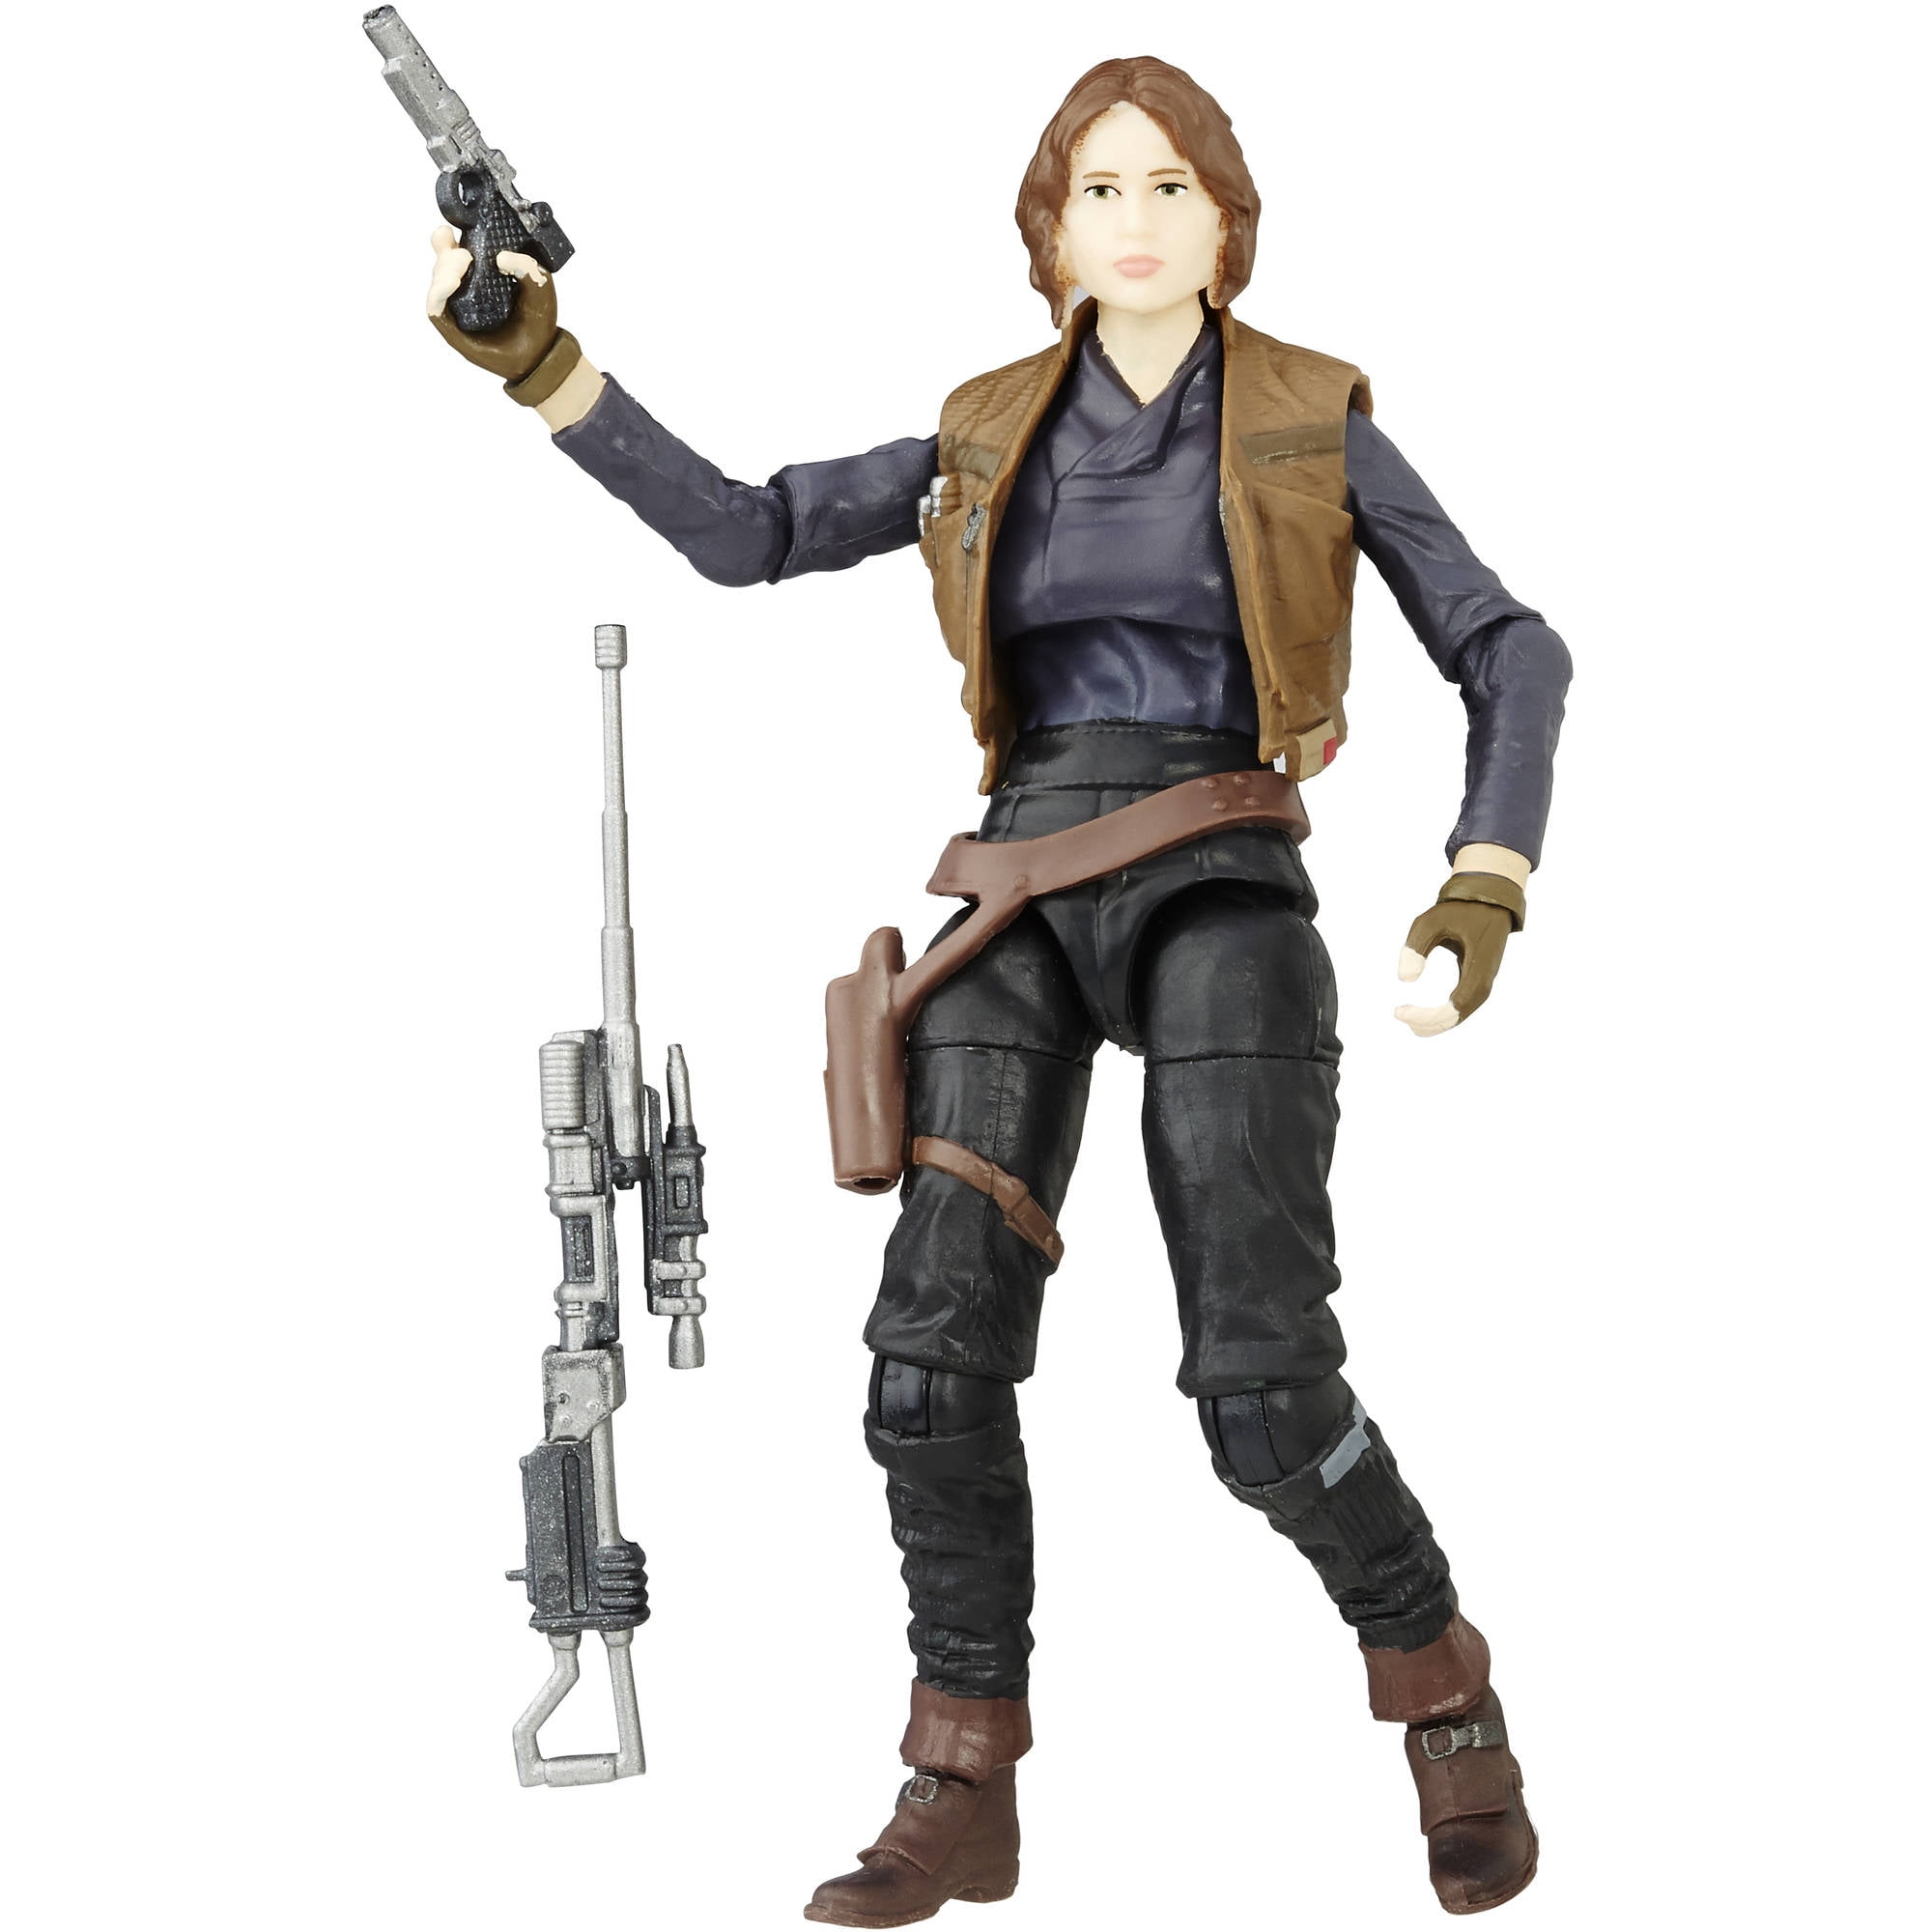 Disney Authentic SERGEANT JYN ERSO FIGURINE Cake TOPPER STAR WARS ROGUE ONE NEW 